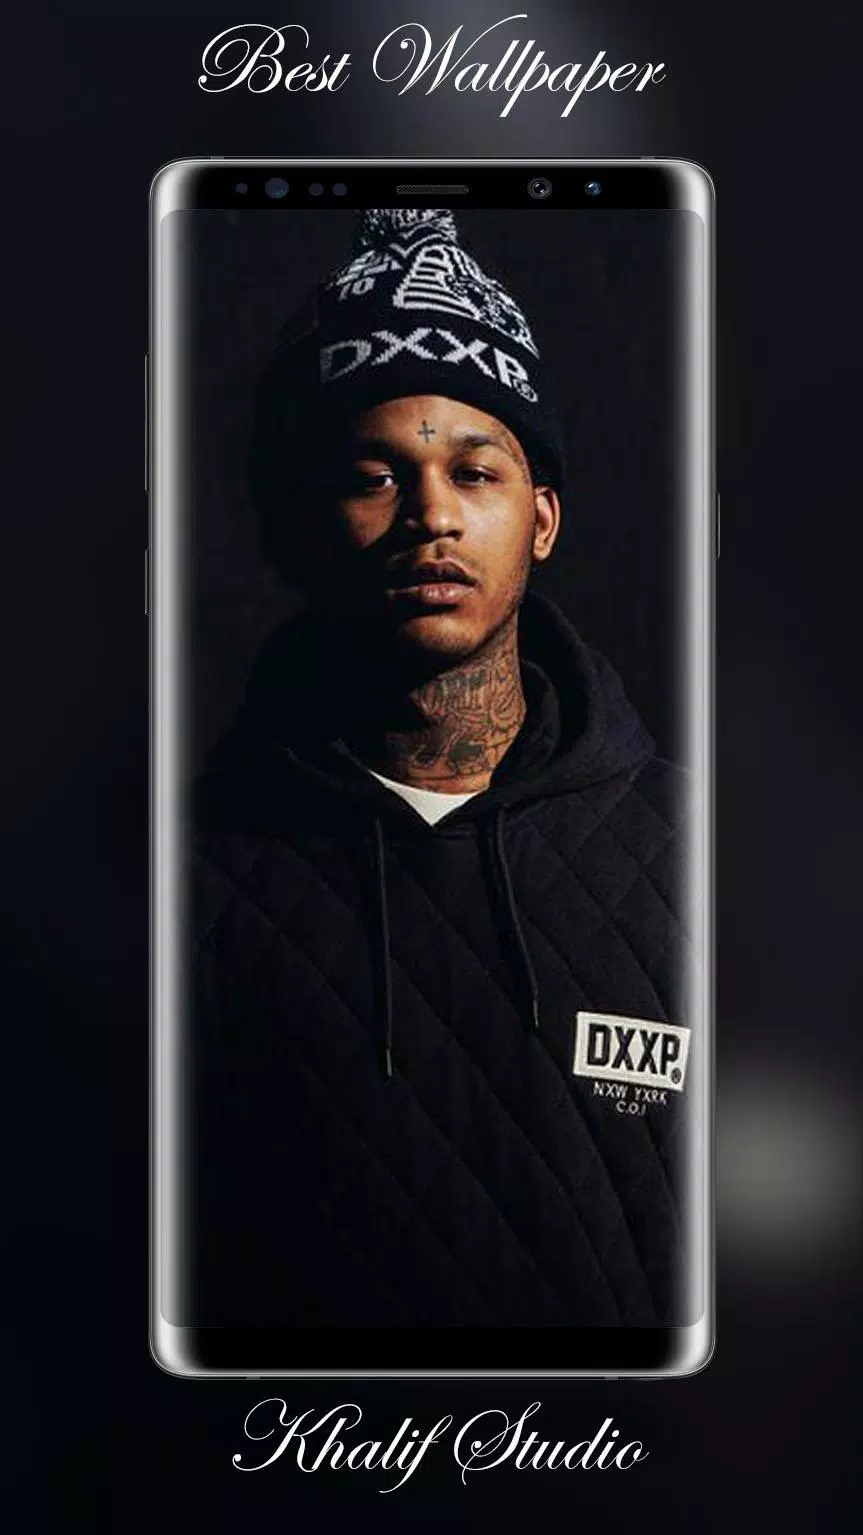 Fredo santana wallpapers hd apk for android download